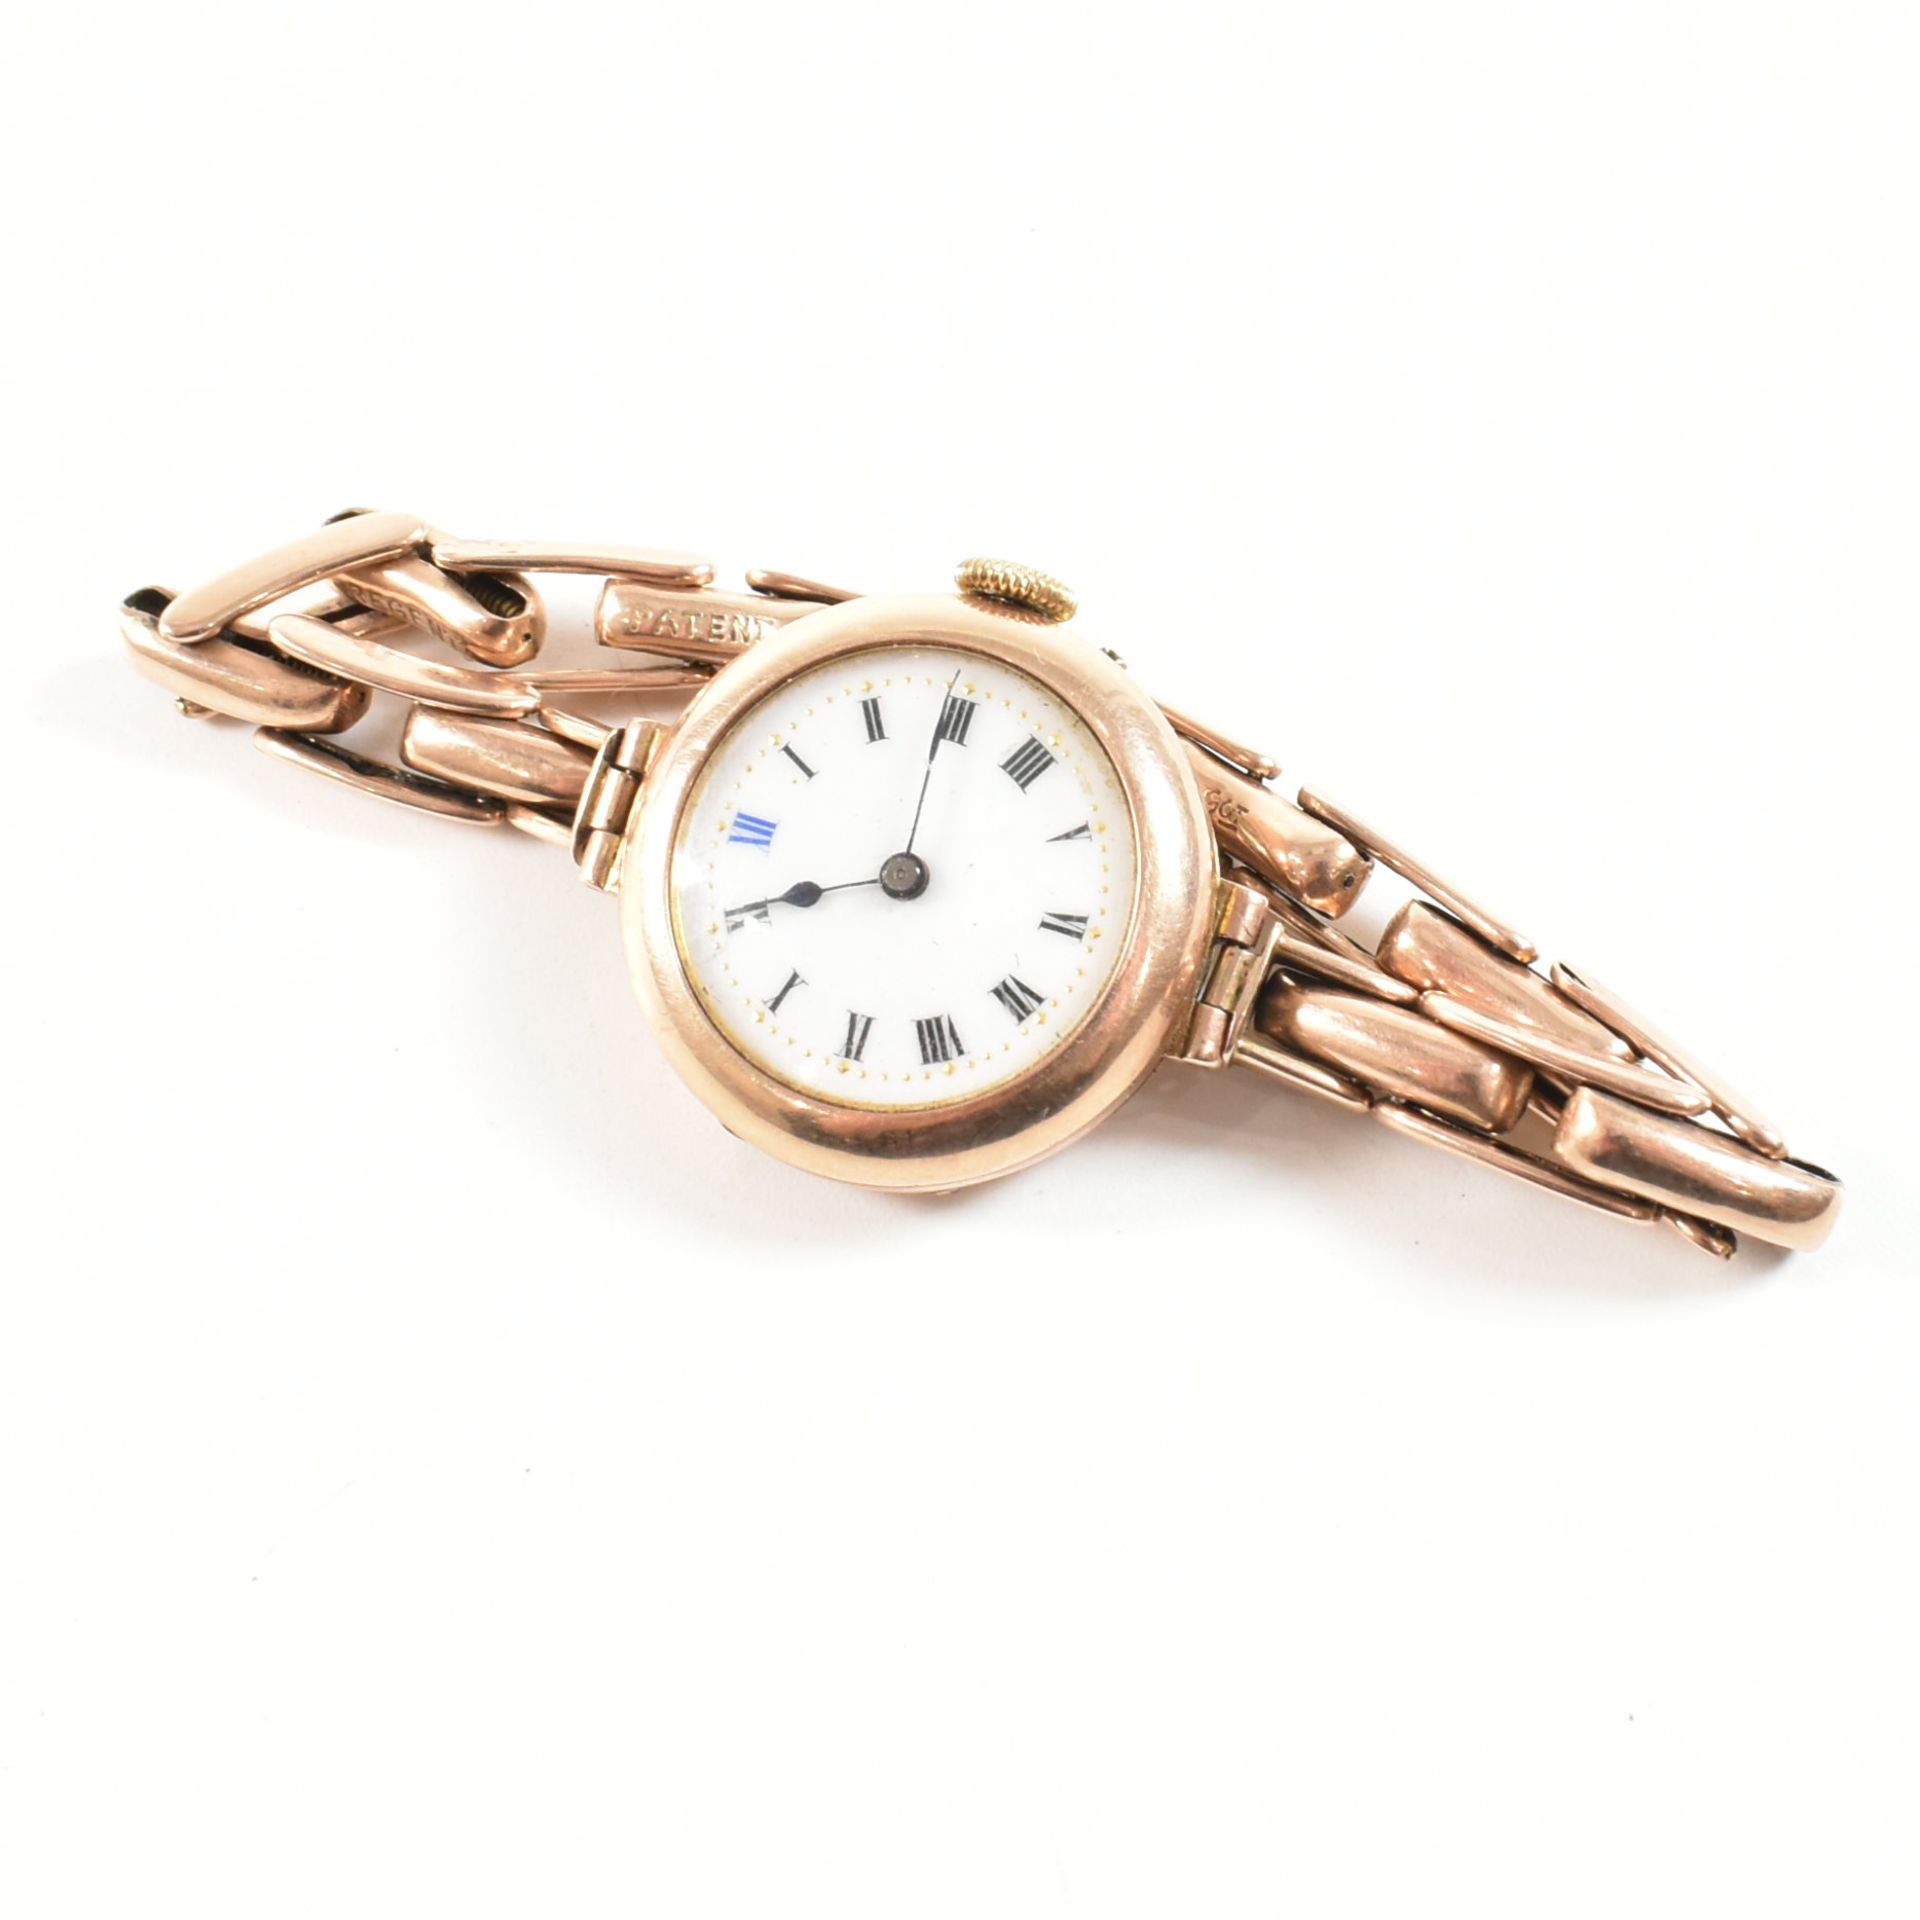 EARLY 20TH CENTURY 9CT GOLD LADIES DRESS WRISTWATCH - Image 6 of 7